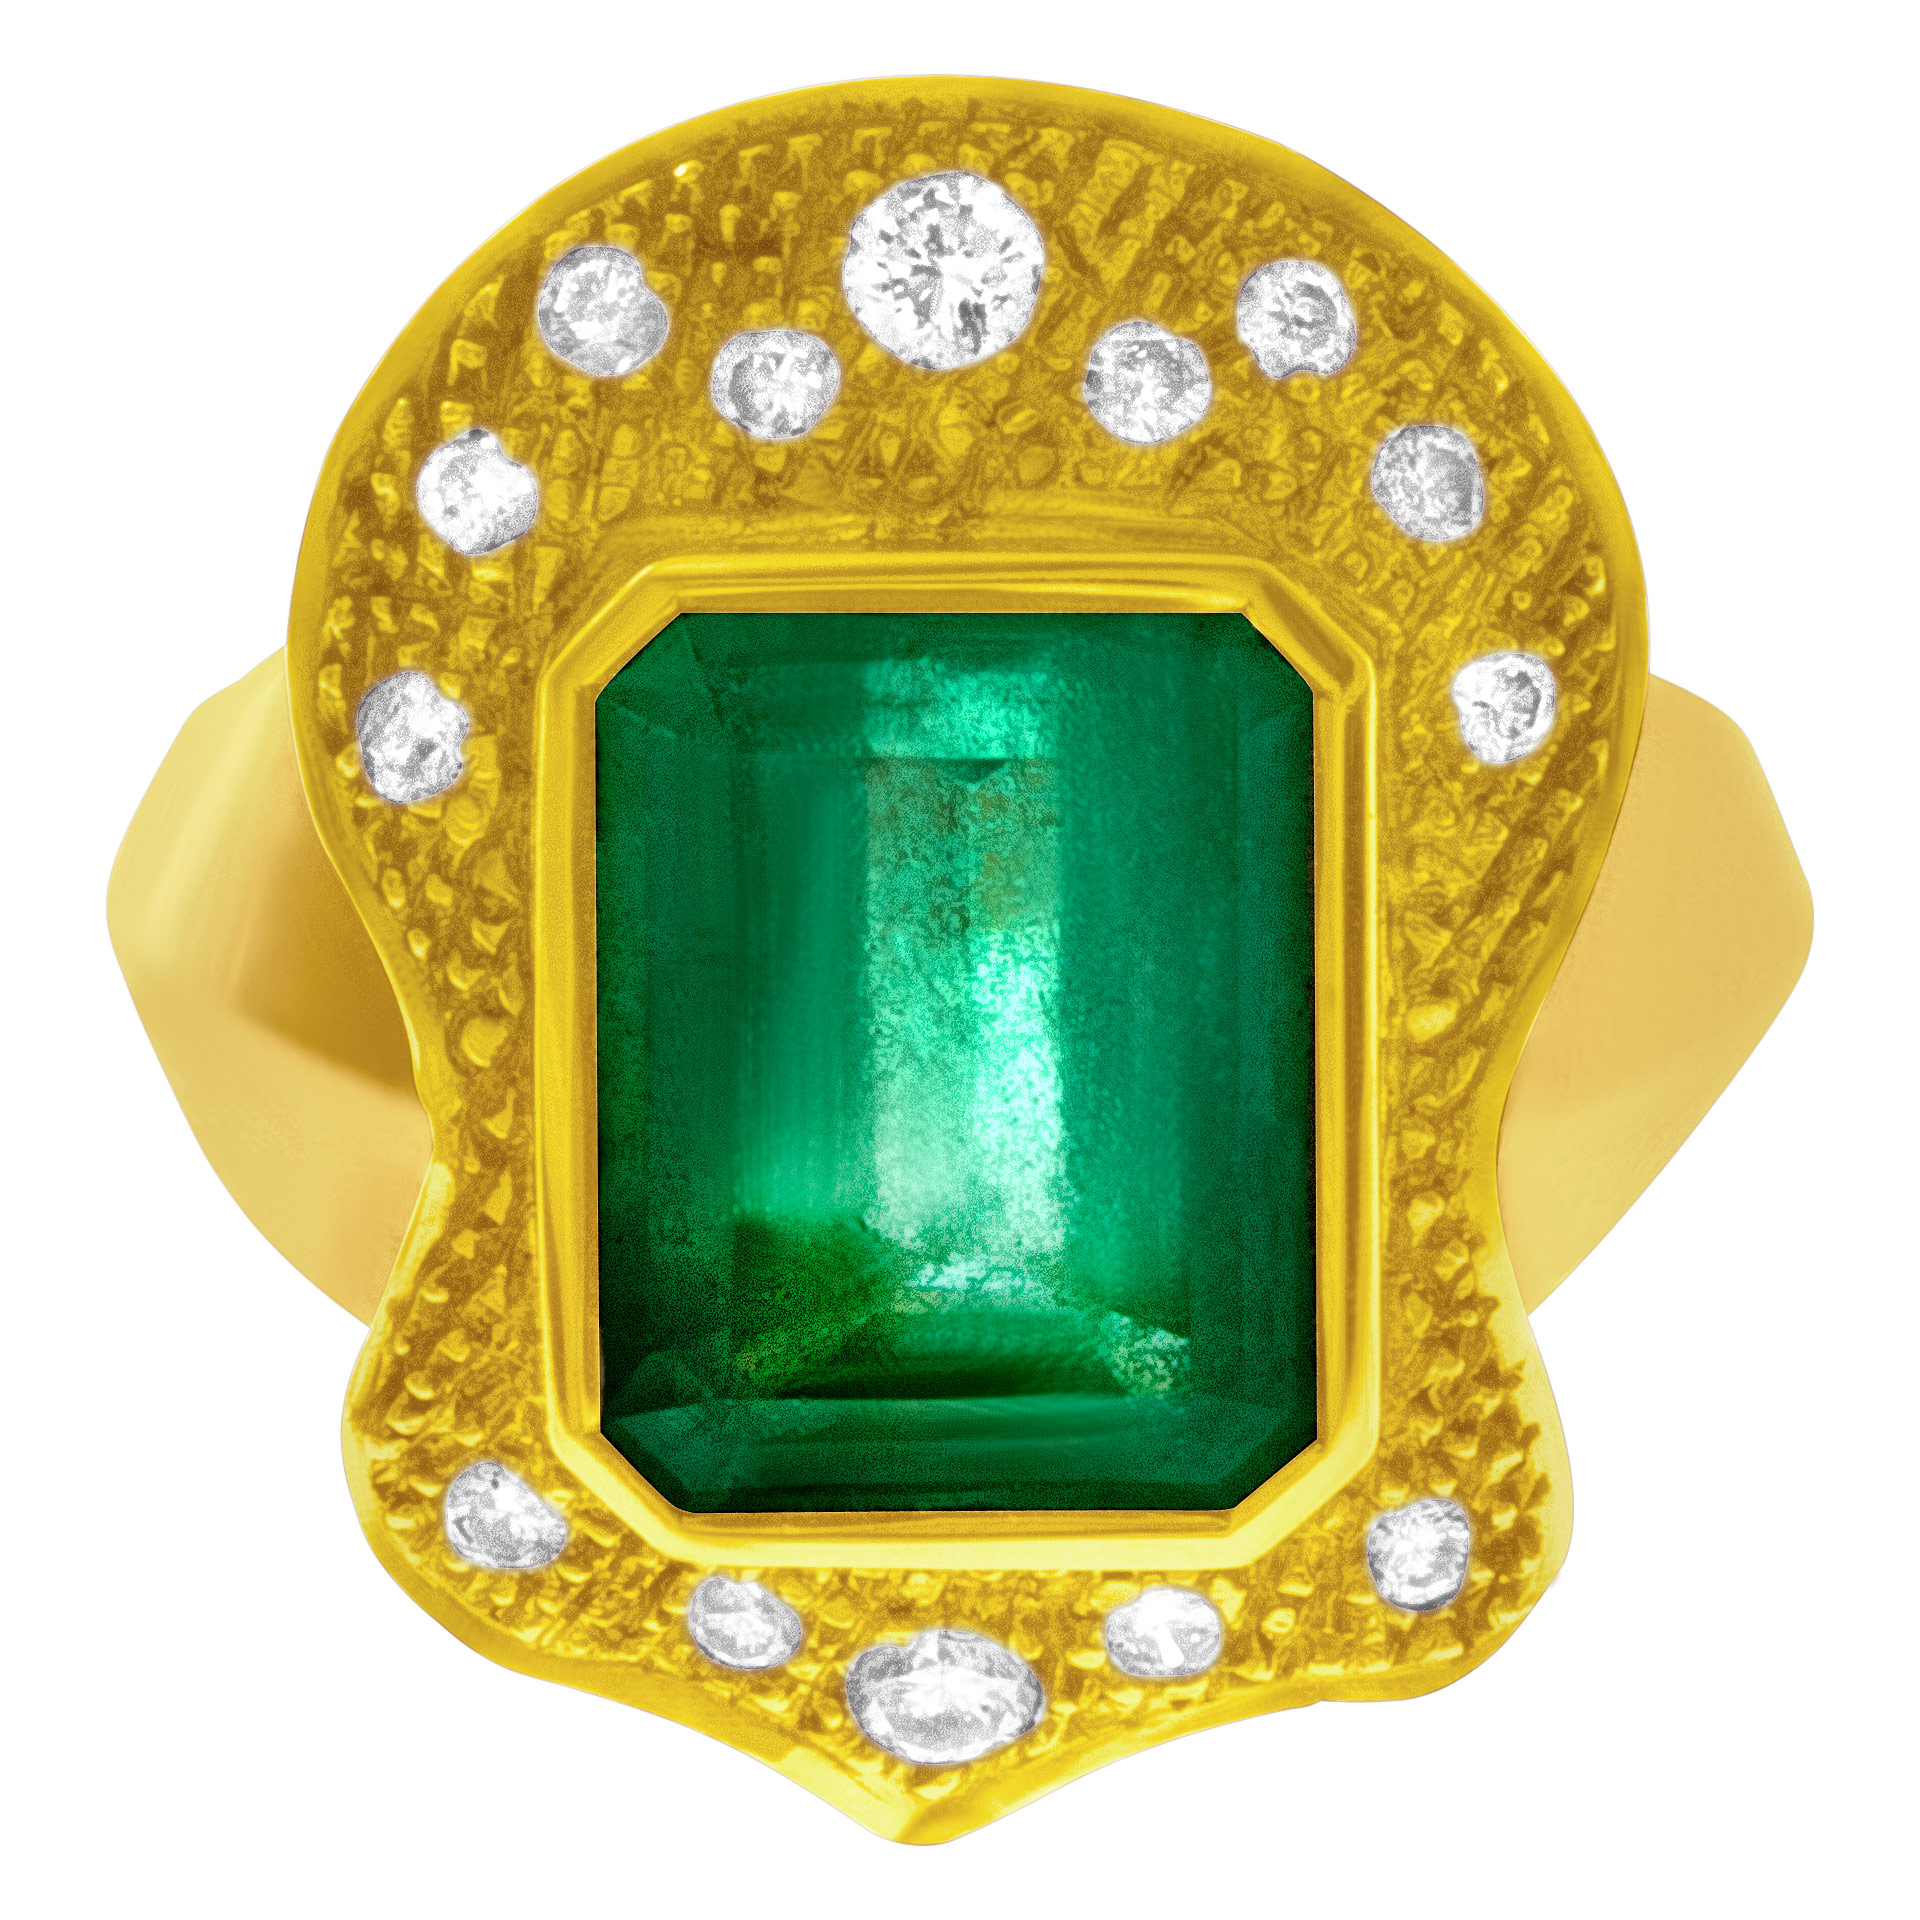 Emerald ring with diamond accents in 18k. 4.00 carat emerald. Size 8